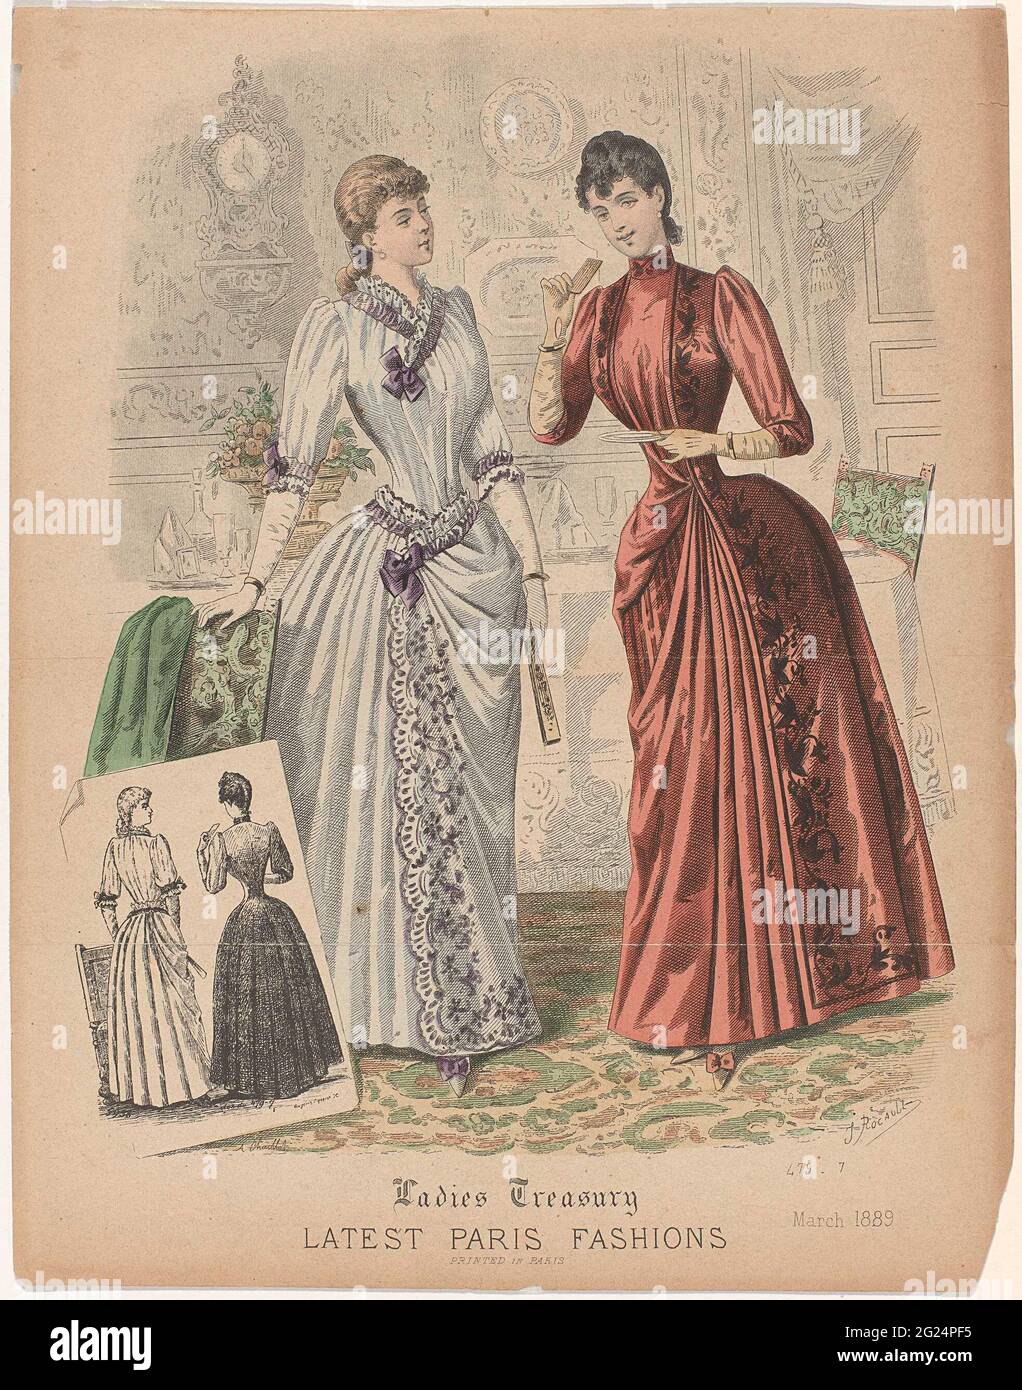 Ladies Treasury, March 1889: Latest Paris Fashions. Two women in the last fashion from Paris. On the left a dress with half long sleeves. Skirt with wrap with floral pattern. Purple bows at neck, cuffs and waist. On the right a high-locked jaw with queue, vertical leaf motif on the fronts. Range in hand. Shoe with bow. They stand for a set table; A woman has a saucer and cookie in the hands. Print from the English fashion magazine 'The Ladies Treasury' (1858-1895). Stock Photo